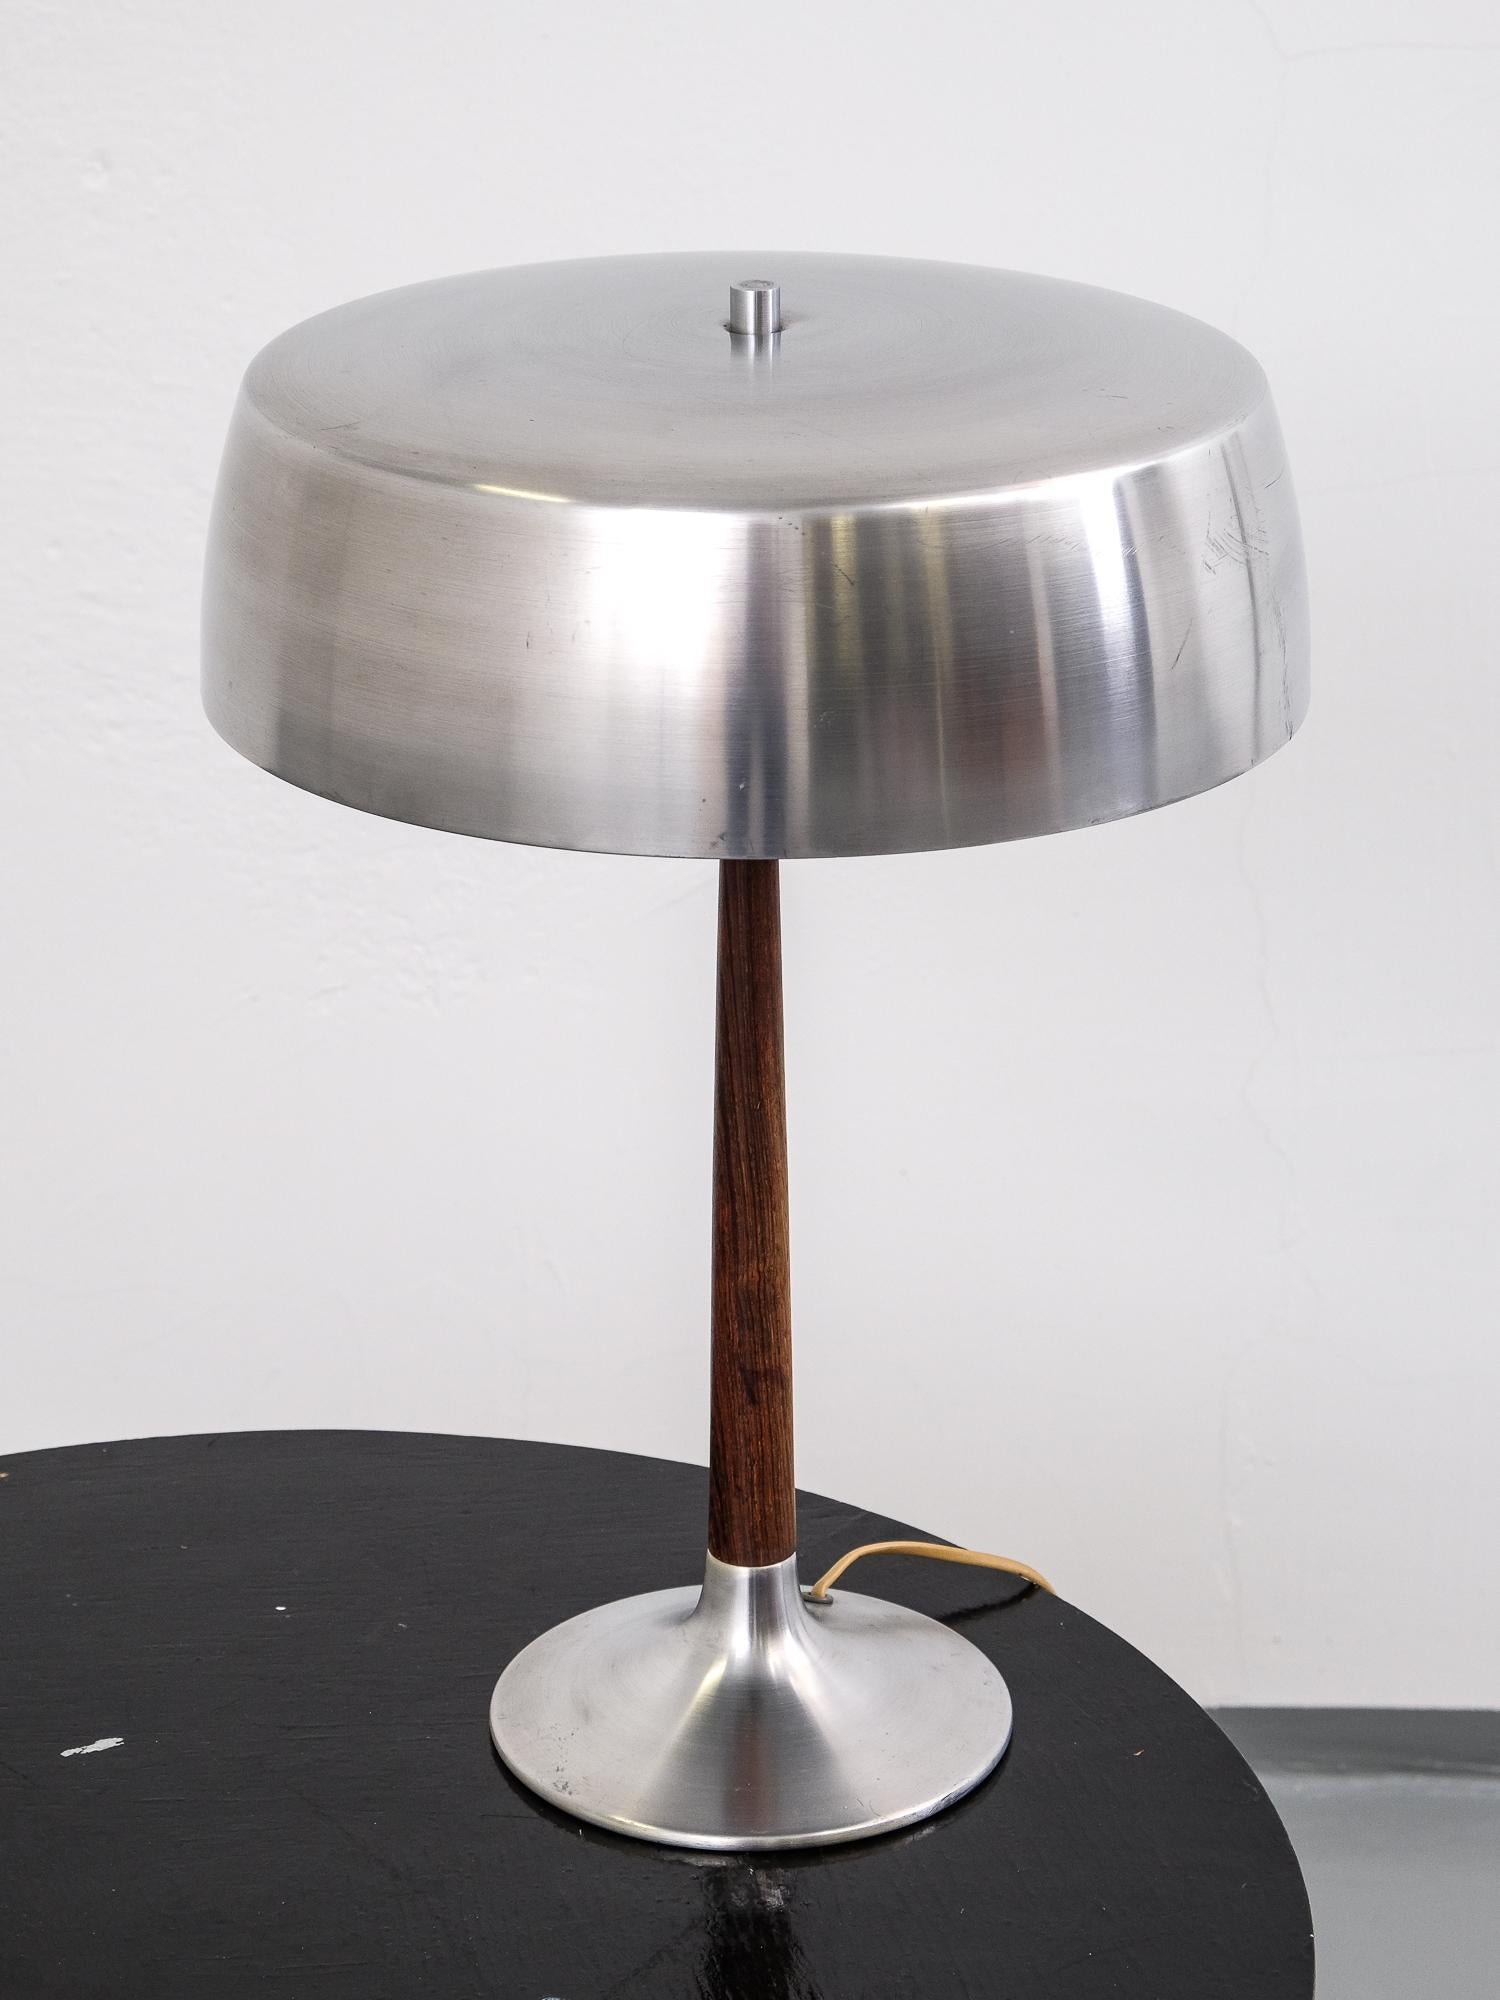 1960s table lamp in rosewood and aluminium designed and manufactured in Denmark by Svend Aage Holm Sørensen for Holm Sørensen & co. This model (model 4109) is a very rare find.